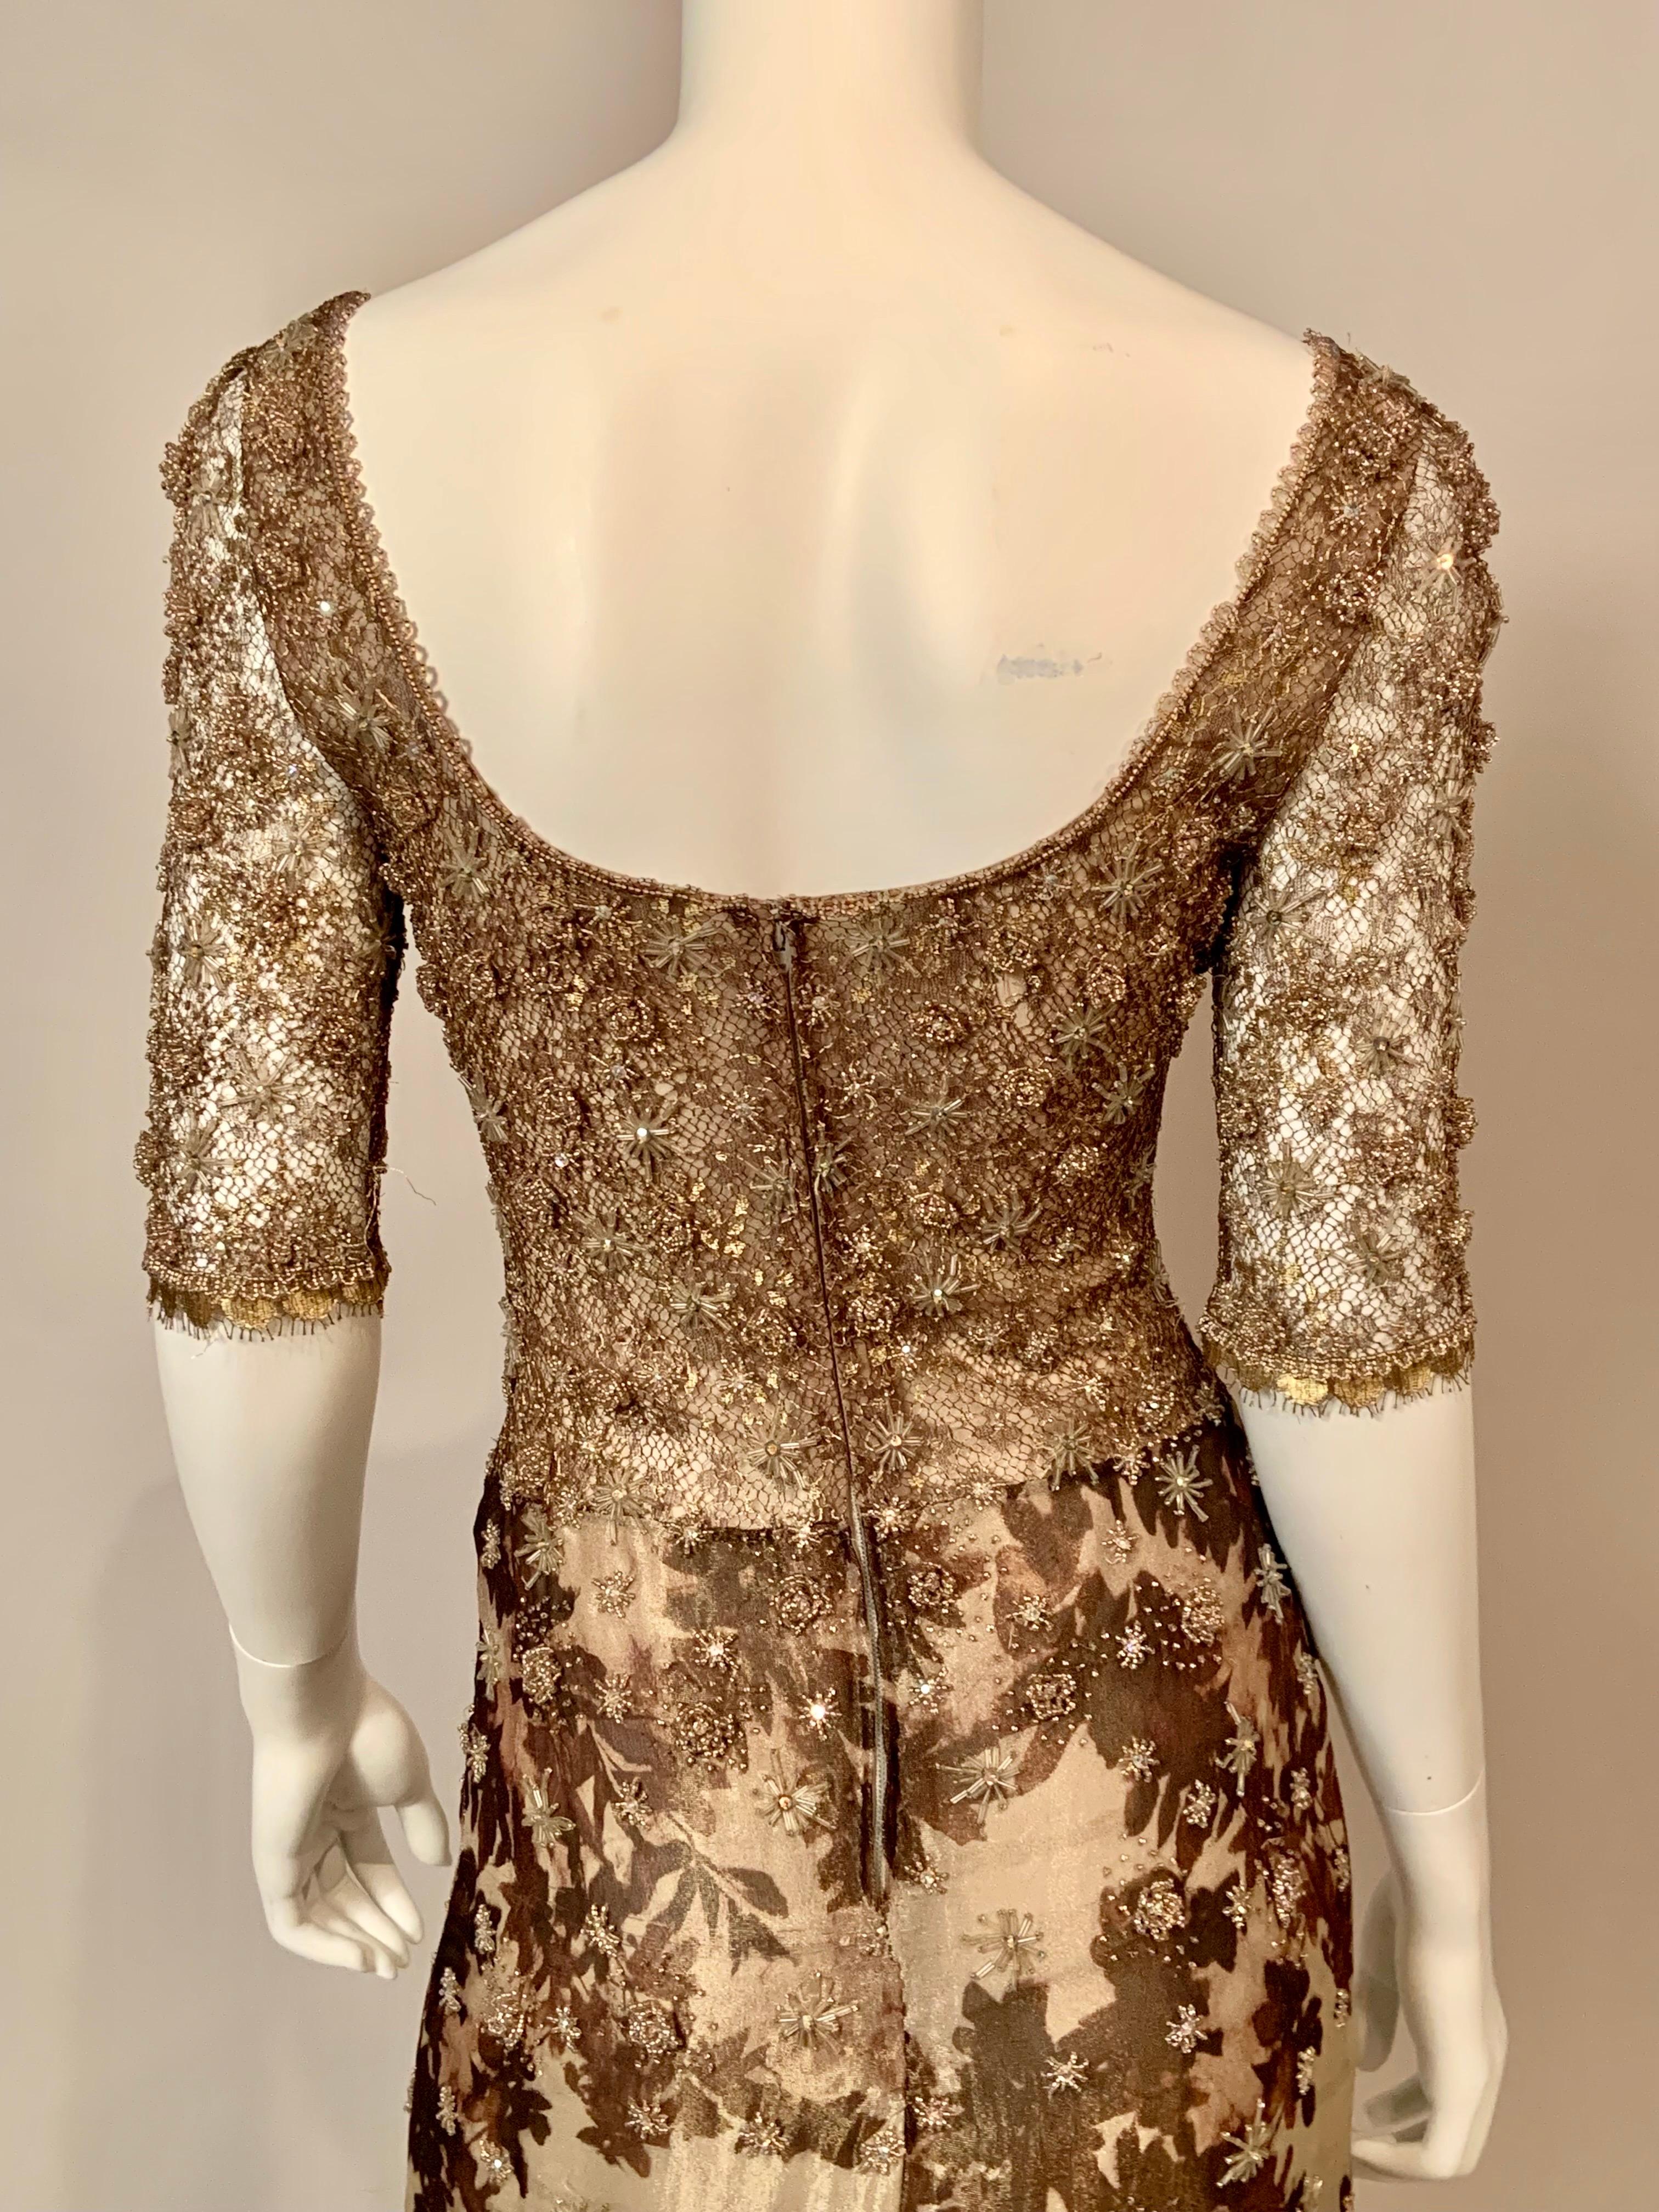 Badgley Mischka Starburst Beaded Gown Gold Lace Top Shimmery Fern Pattern Skirt 6